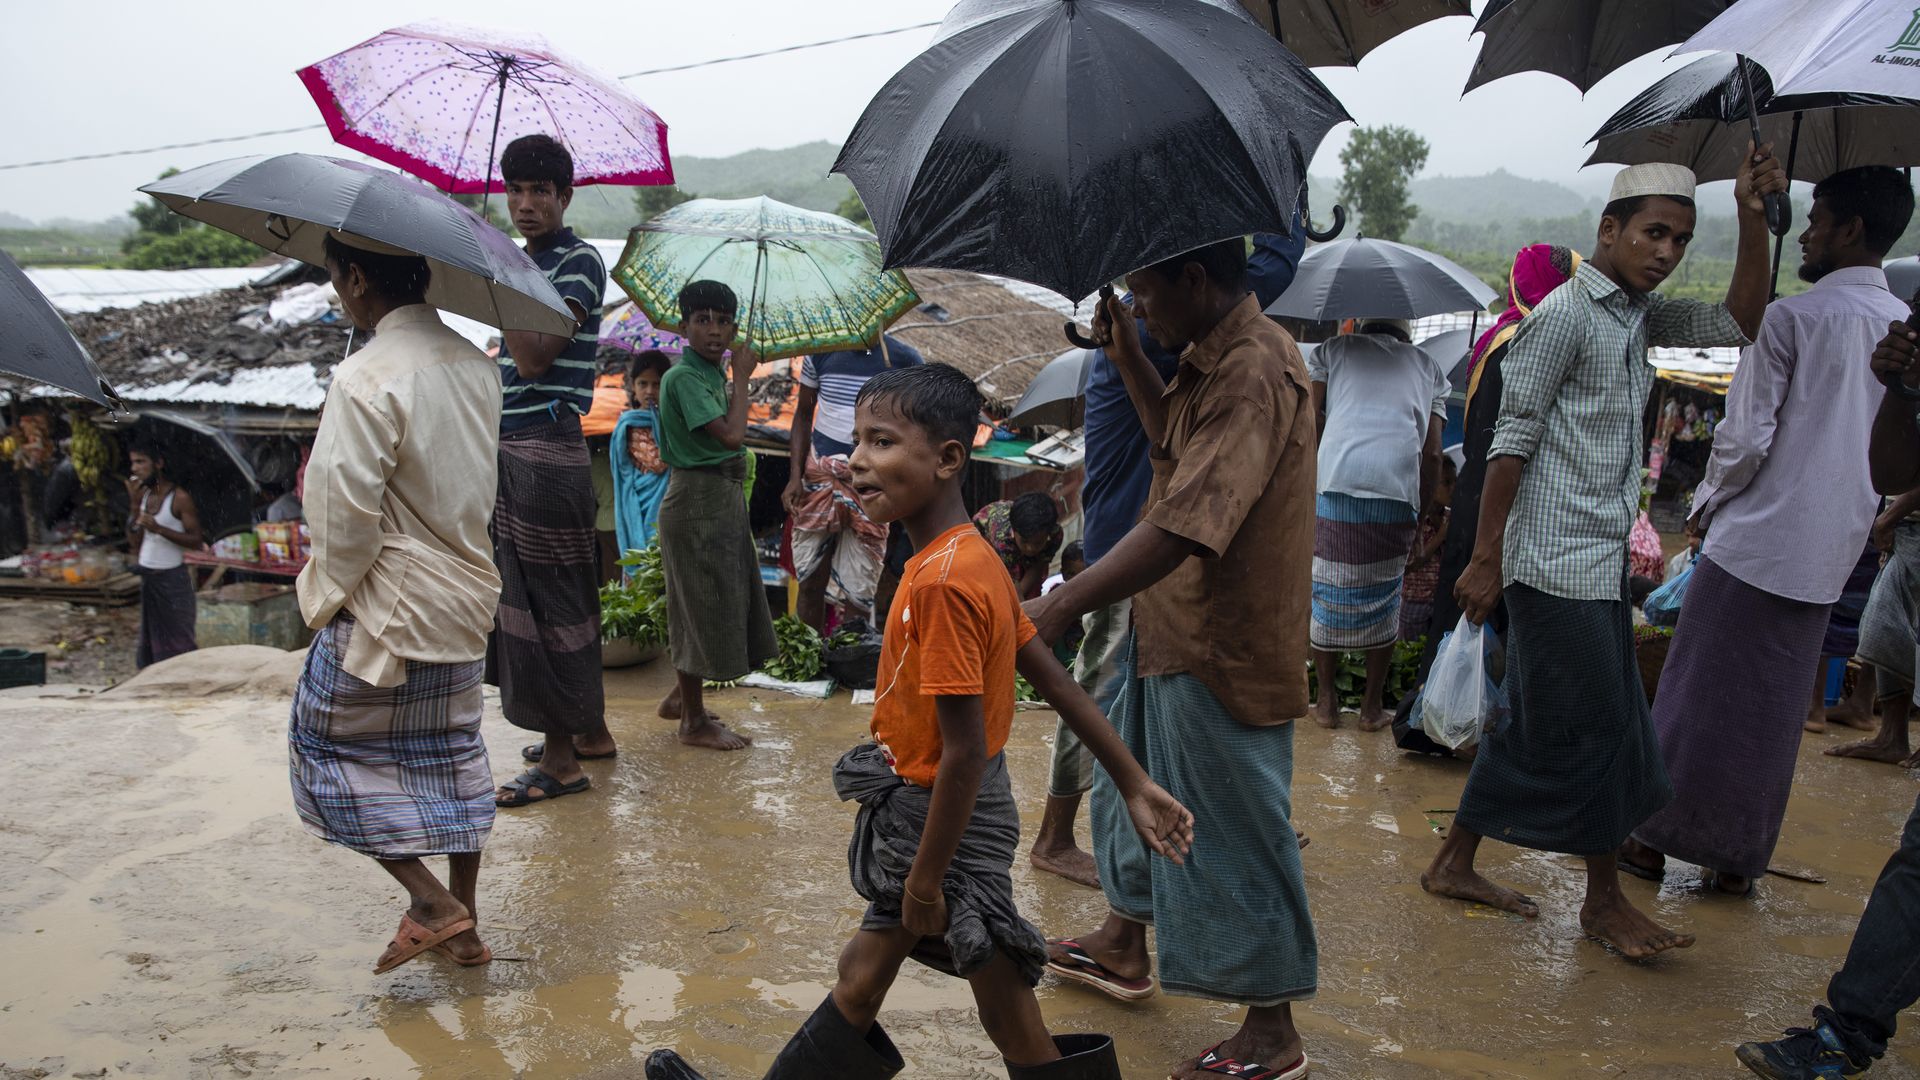 Monsoon rains hit the refugee camps as Rohingya walk through a local market August 28, 2018 in Unchiprang refugee camp, Cox's Bazar, Bangladesh. 